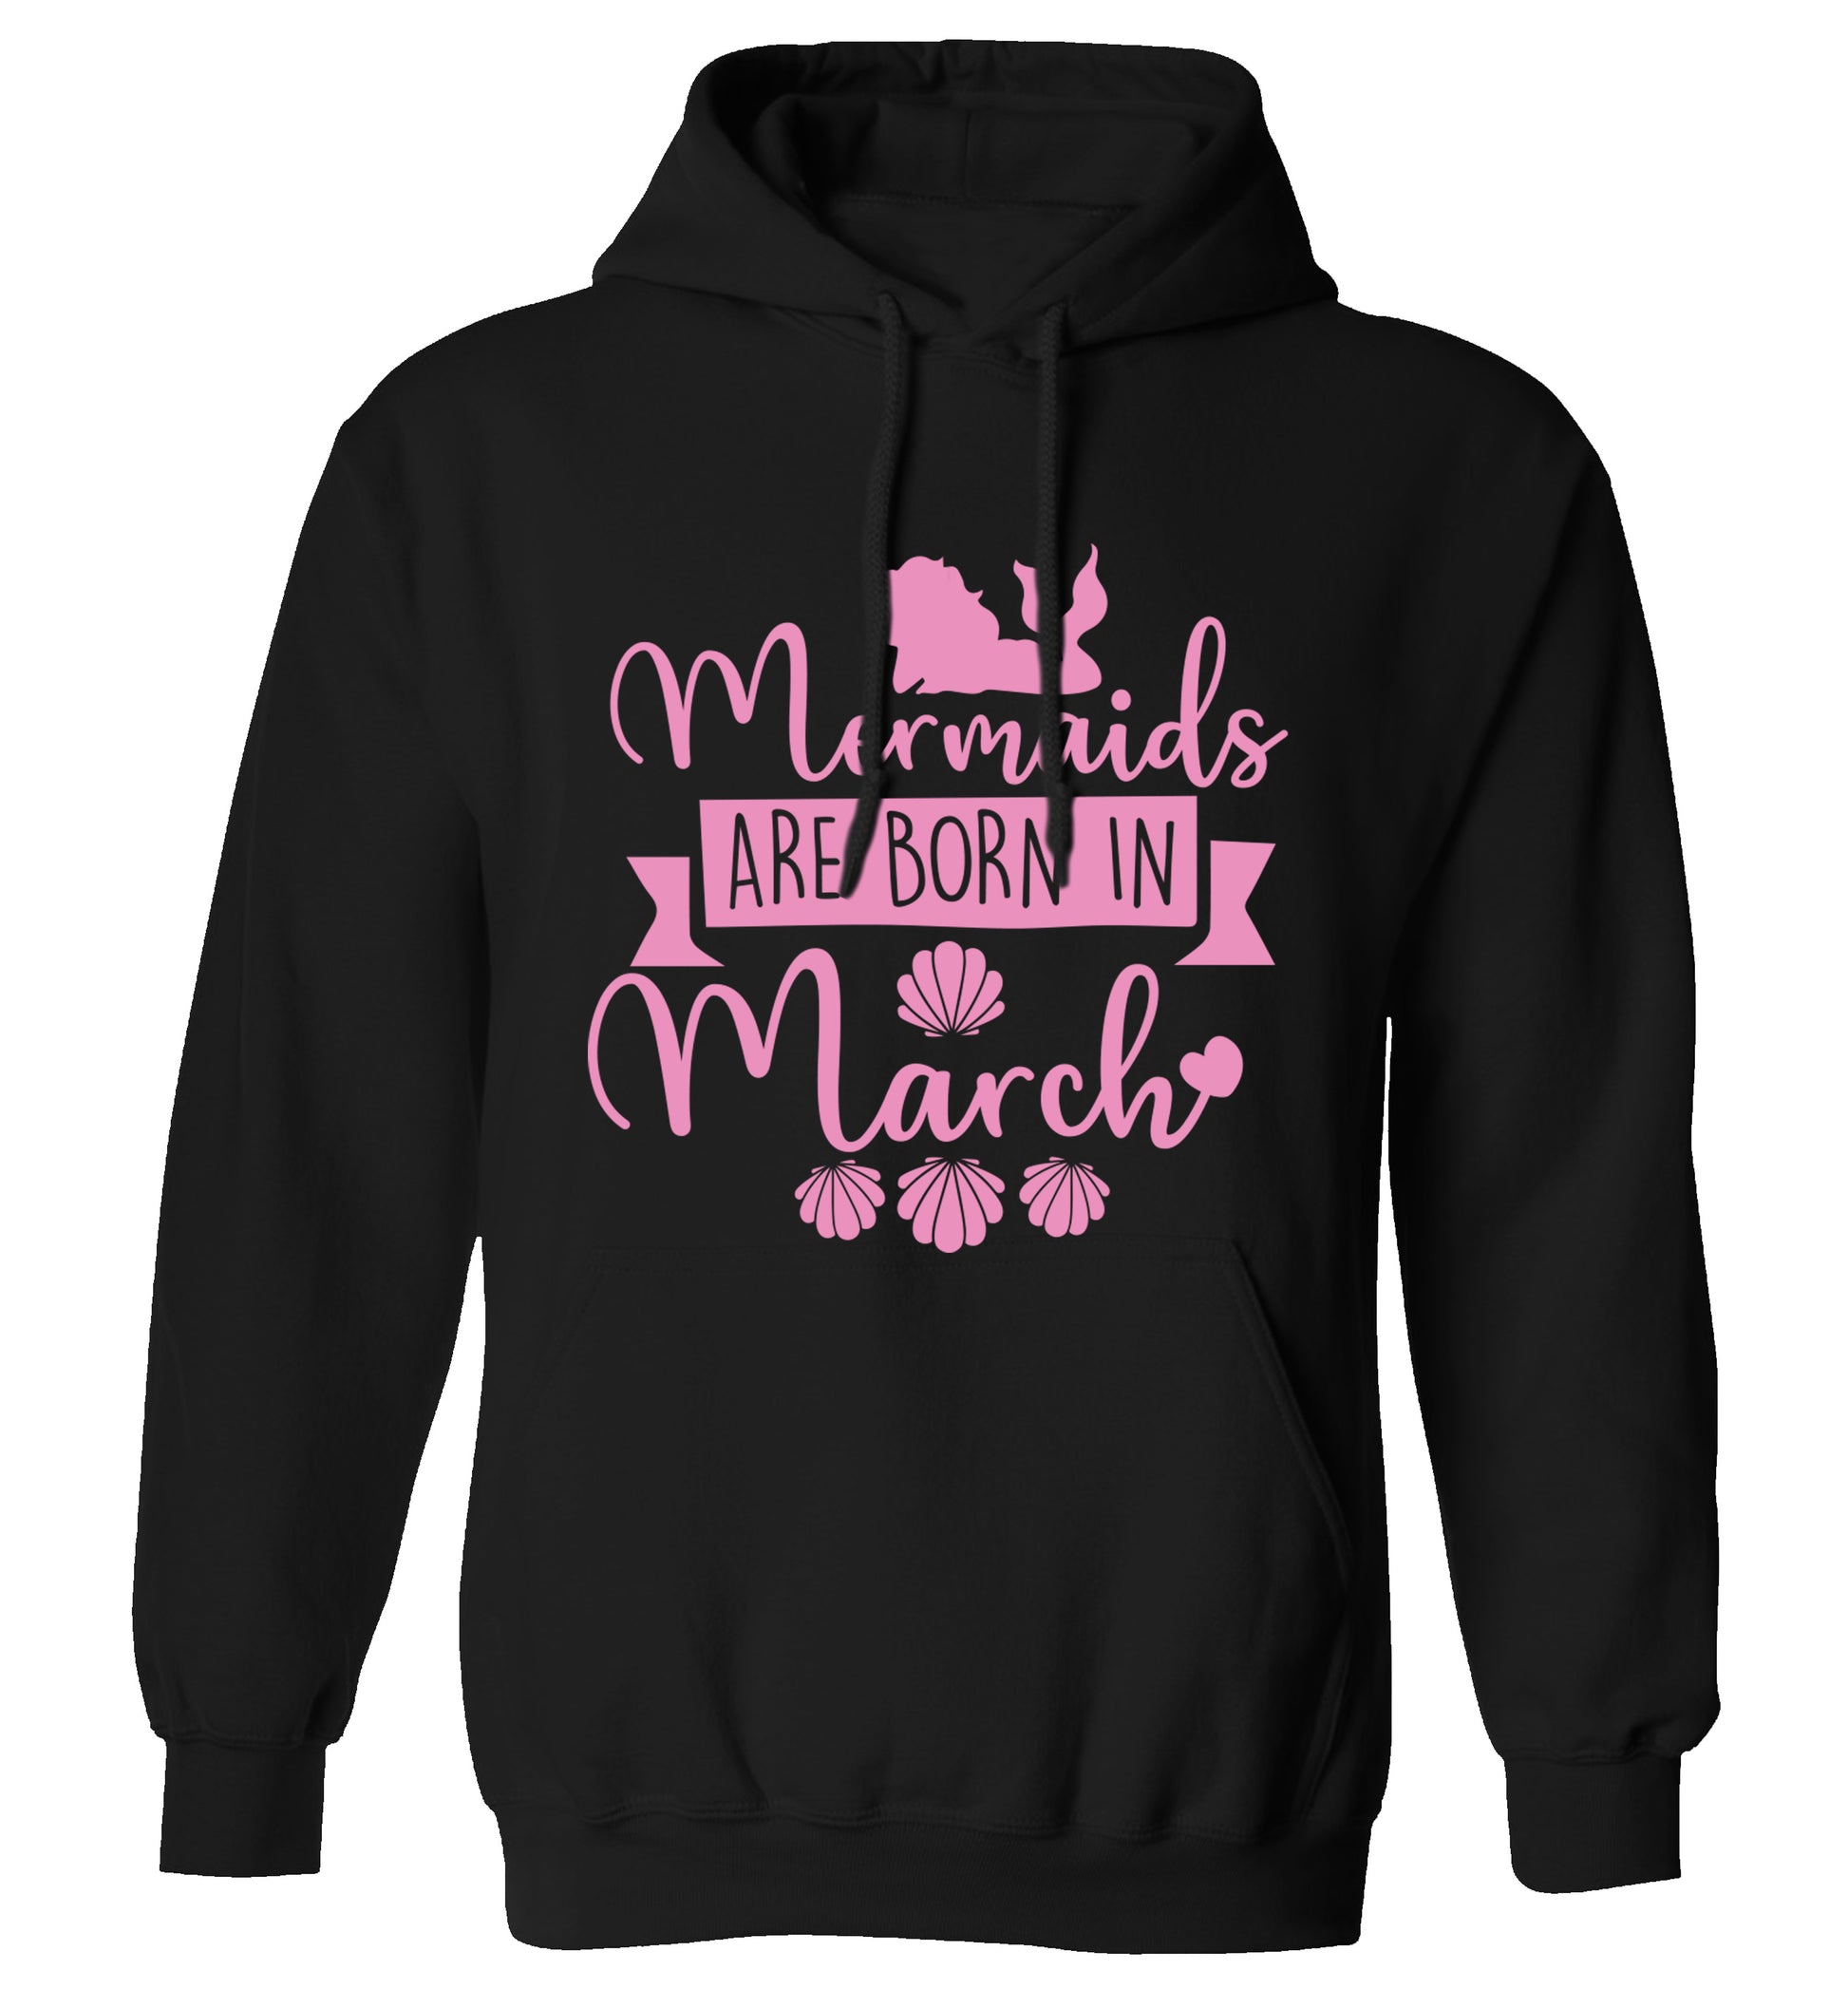 Mermaids are born in March adults unisex black hoodie 2XL